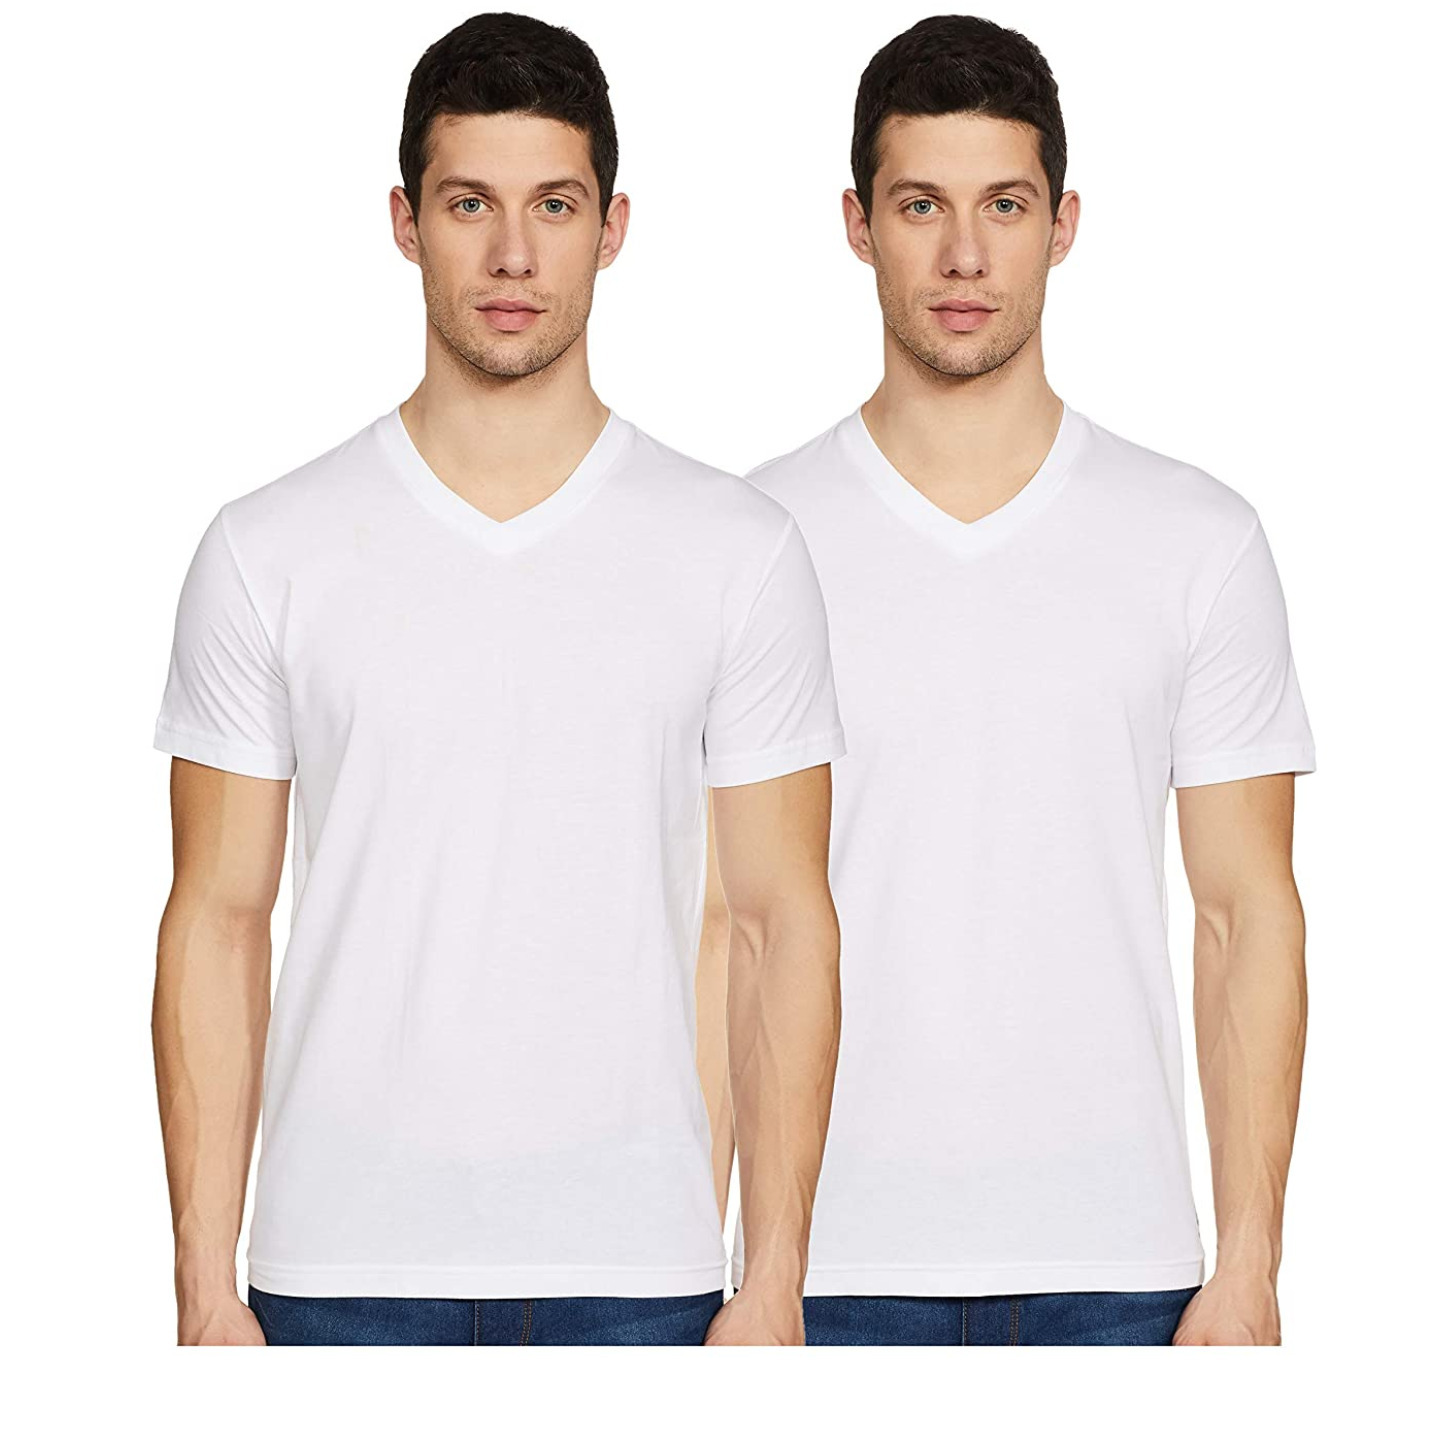 Levi’s Ultra-Soft Cotton 300 LS Classic V Neck Solid T-Shirt (Pack of 2)